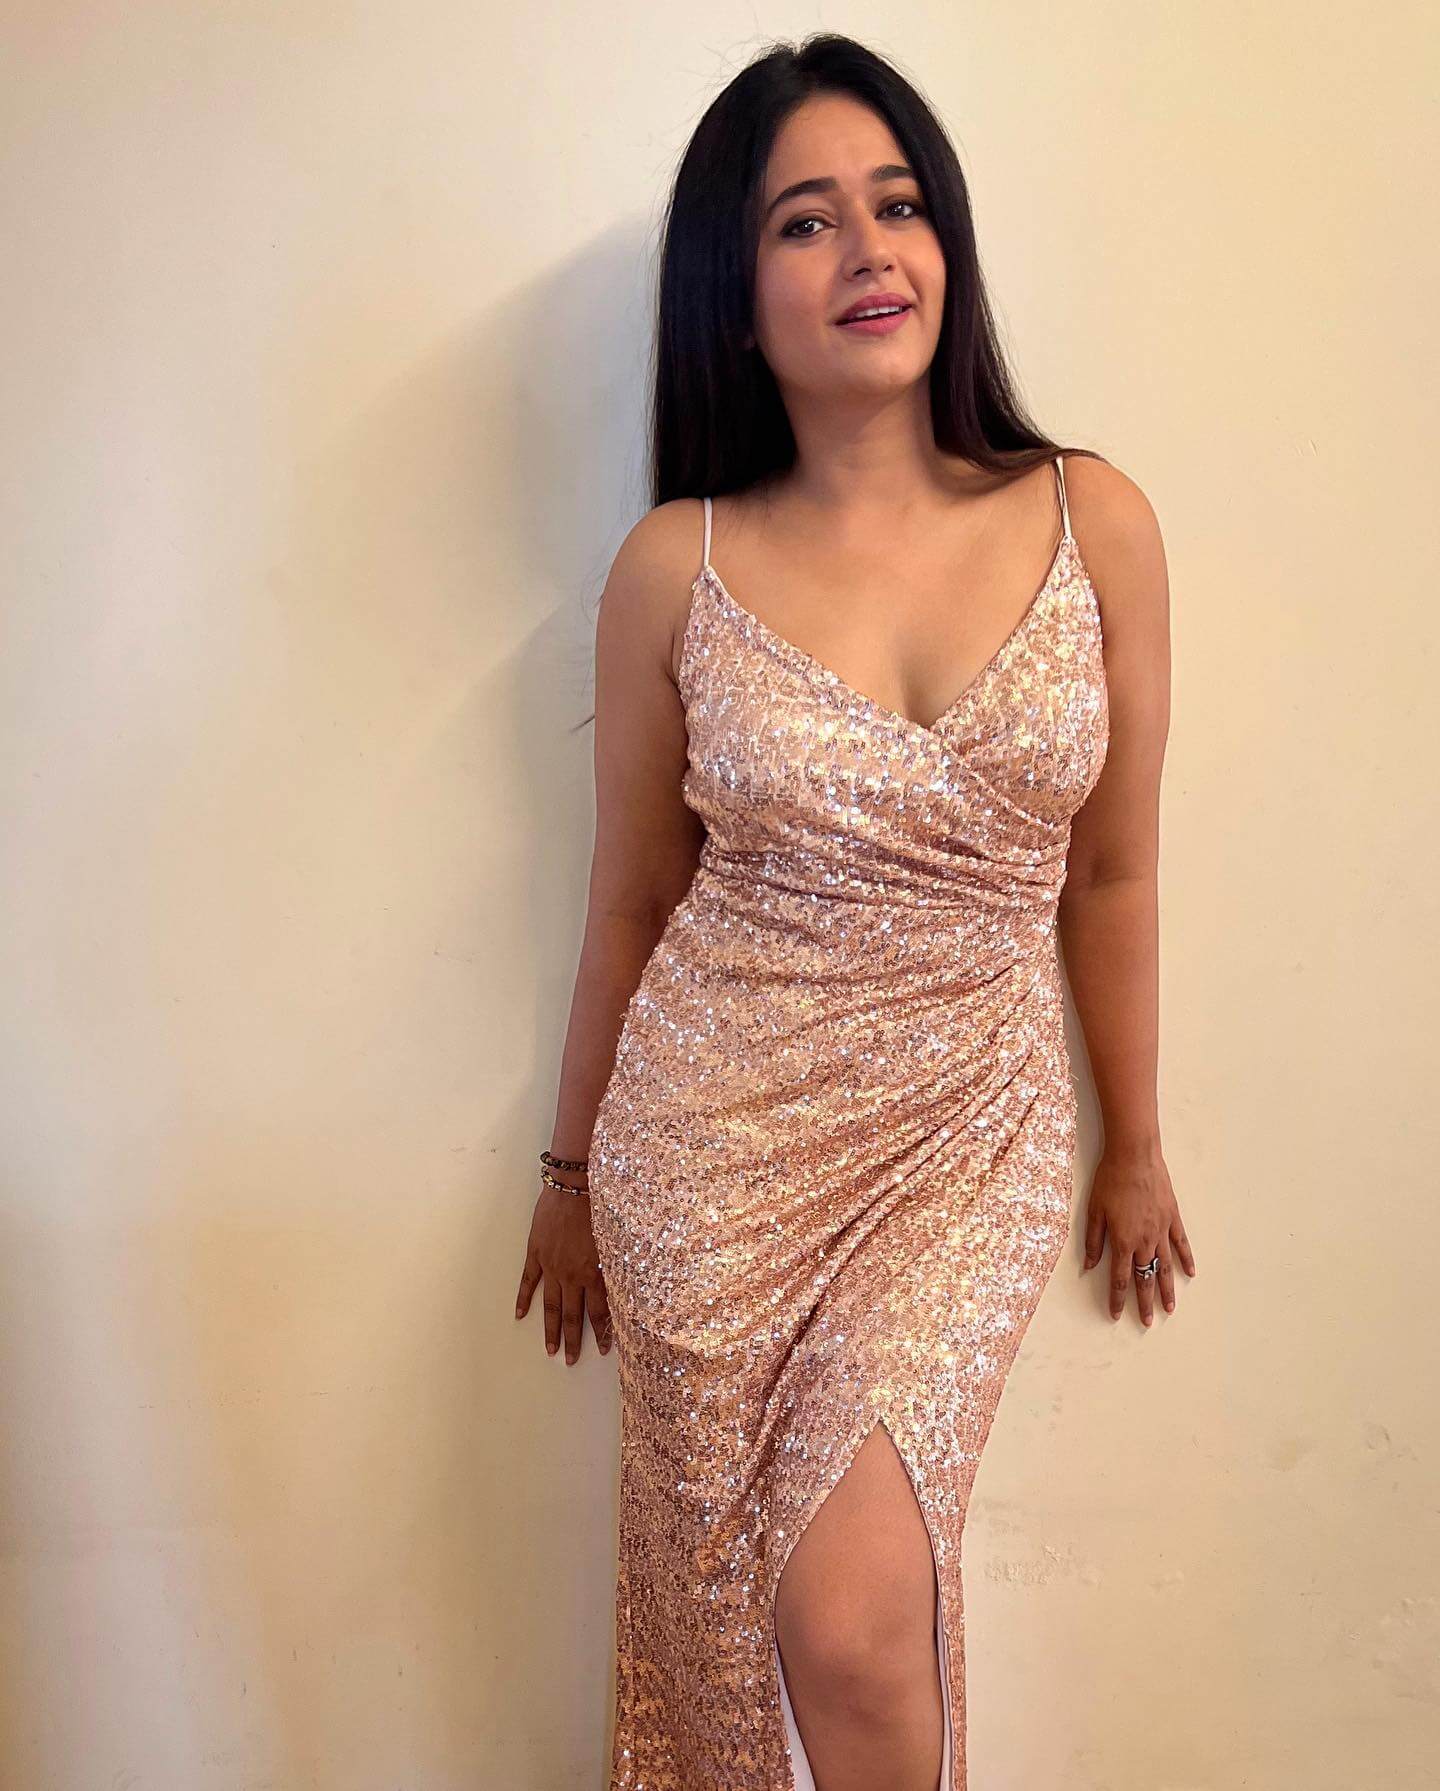 South Actress Poonam Bajwa In Sequined Glittery V-Neck Ruched High Slit Dress